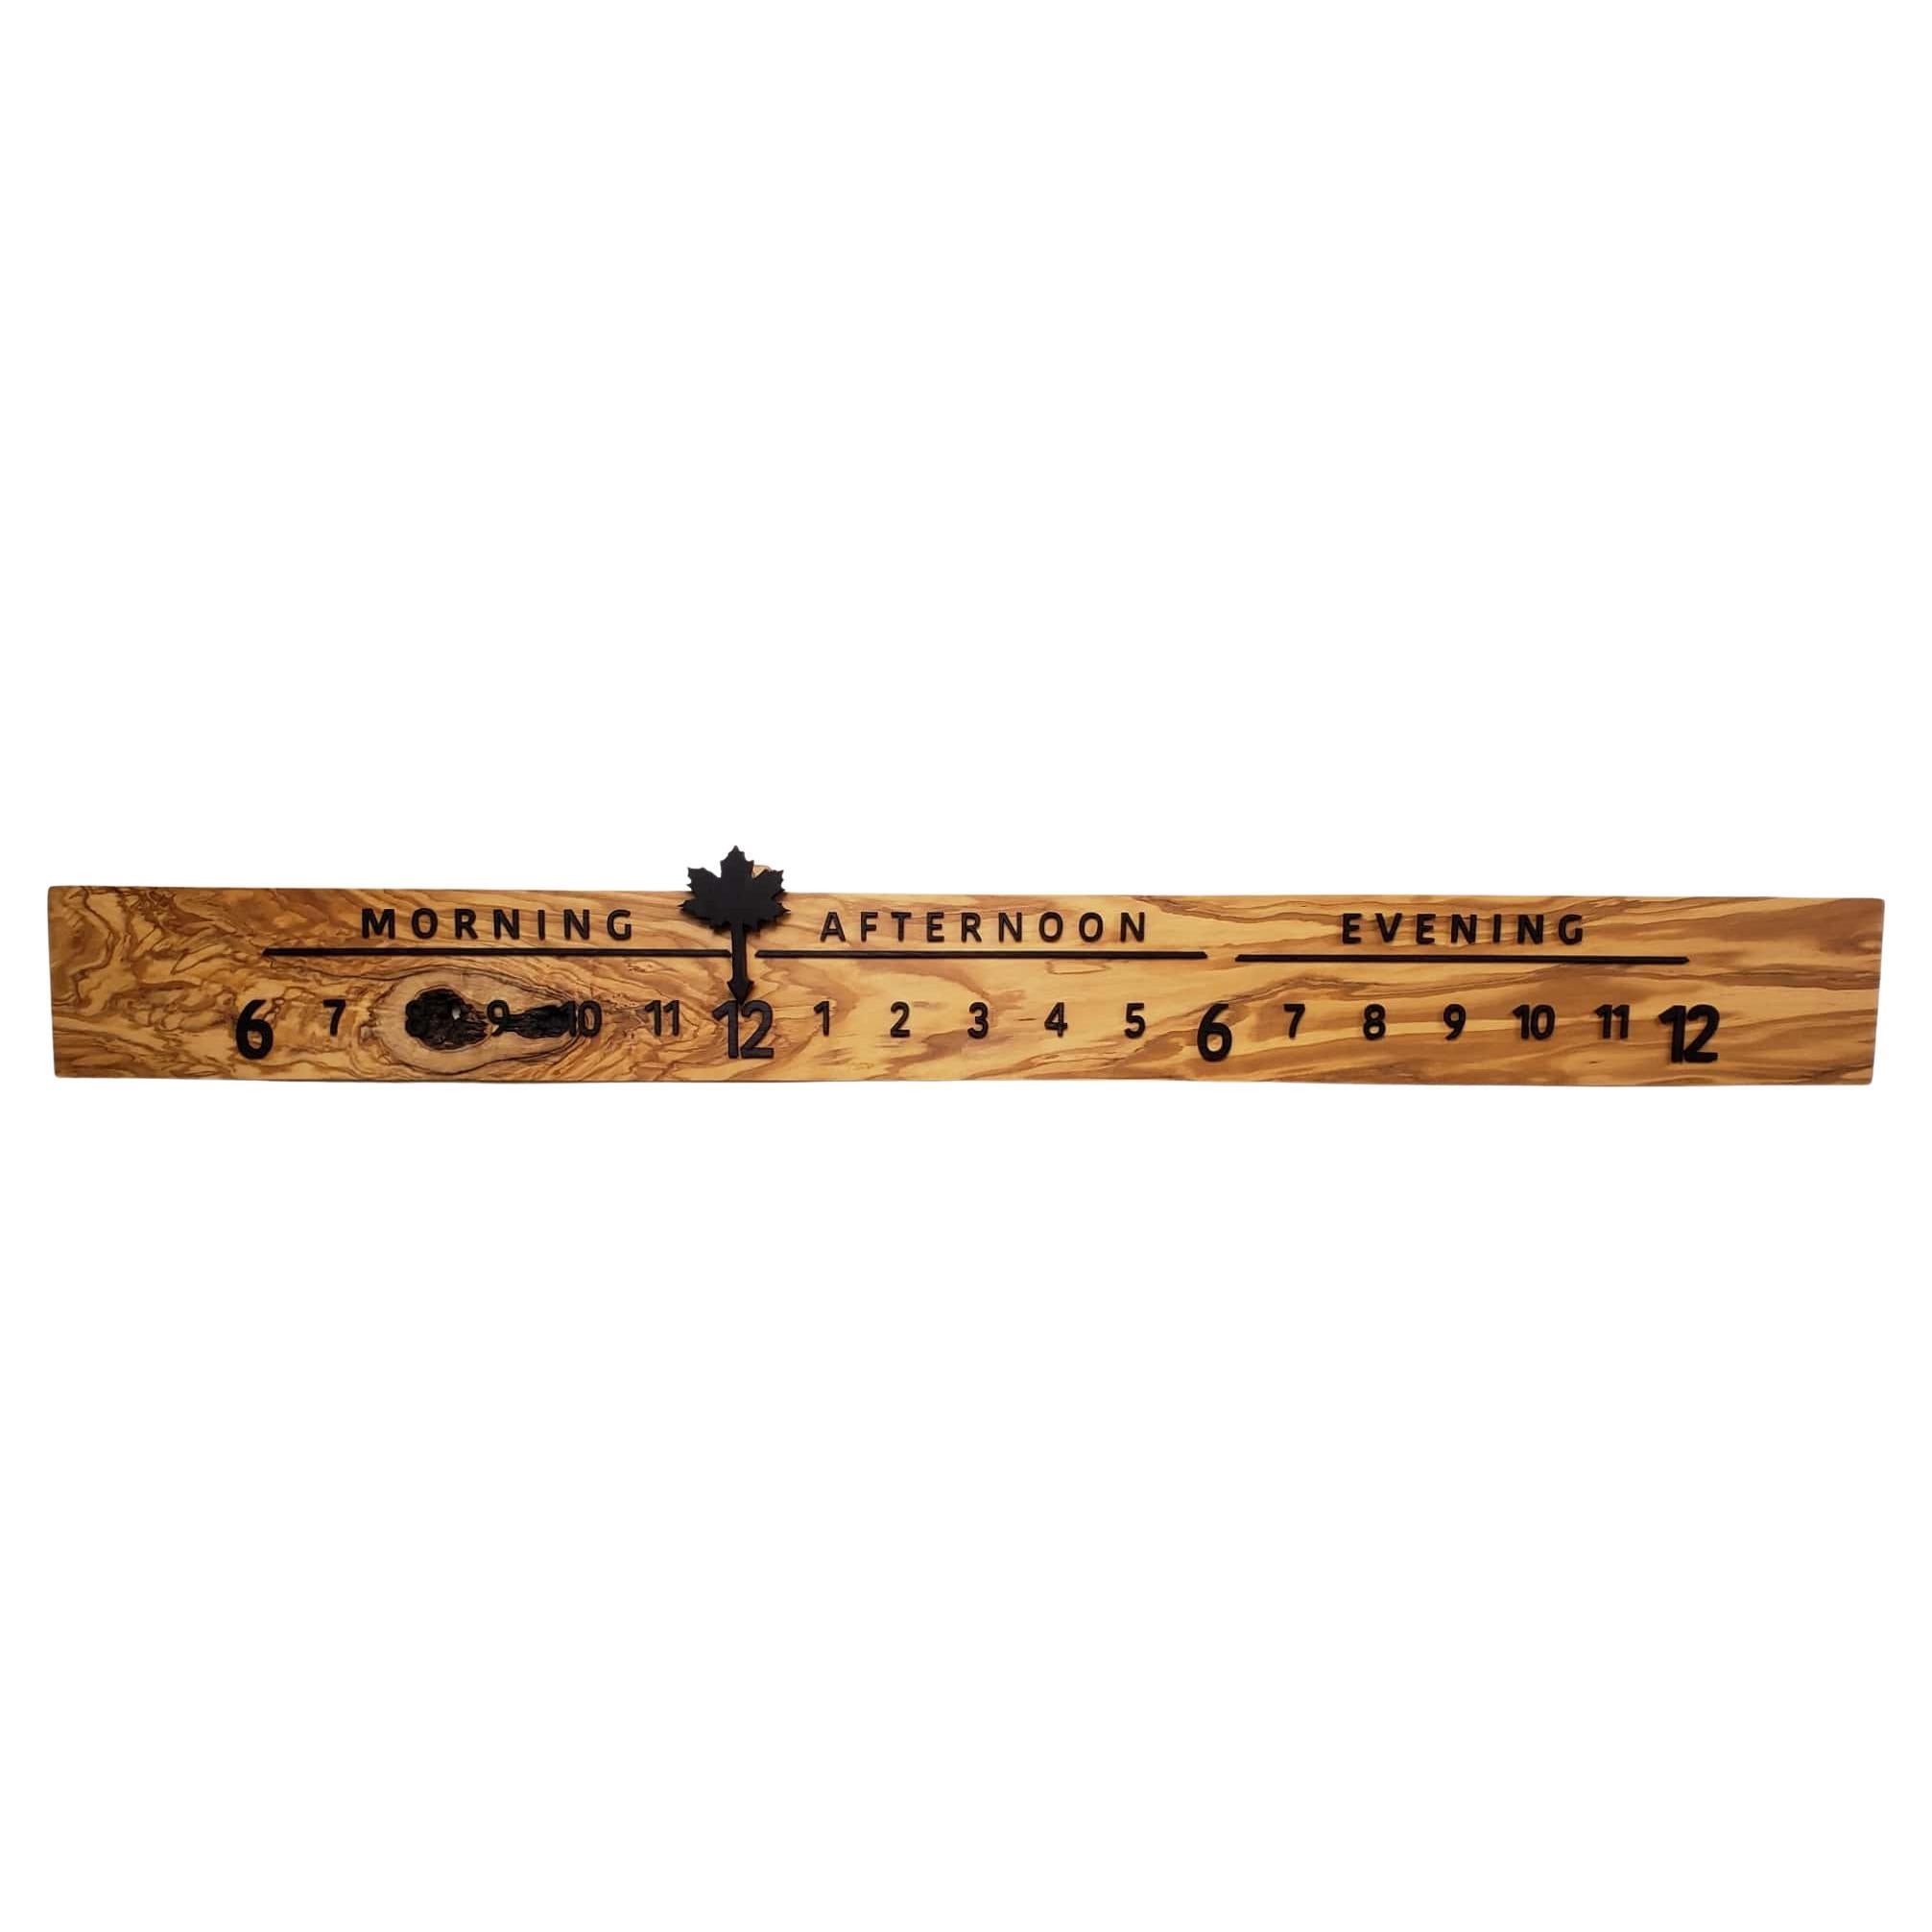 Berry features a stunning Linear Clock made of Olive wood, perfectly complemented by the raised lettering and pointer in Wenge. The composition is dramatic and satisfying to behold. The lusciously varying tones in the Olive wood feel like an